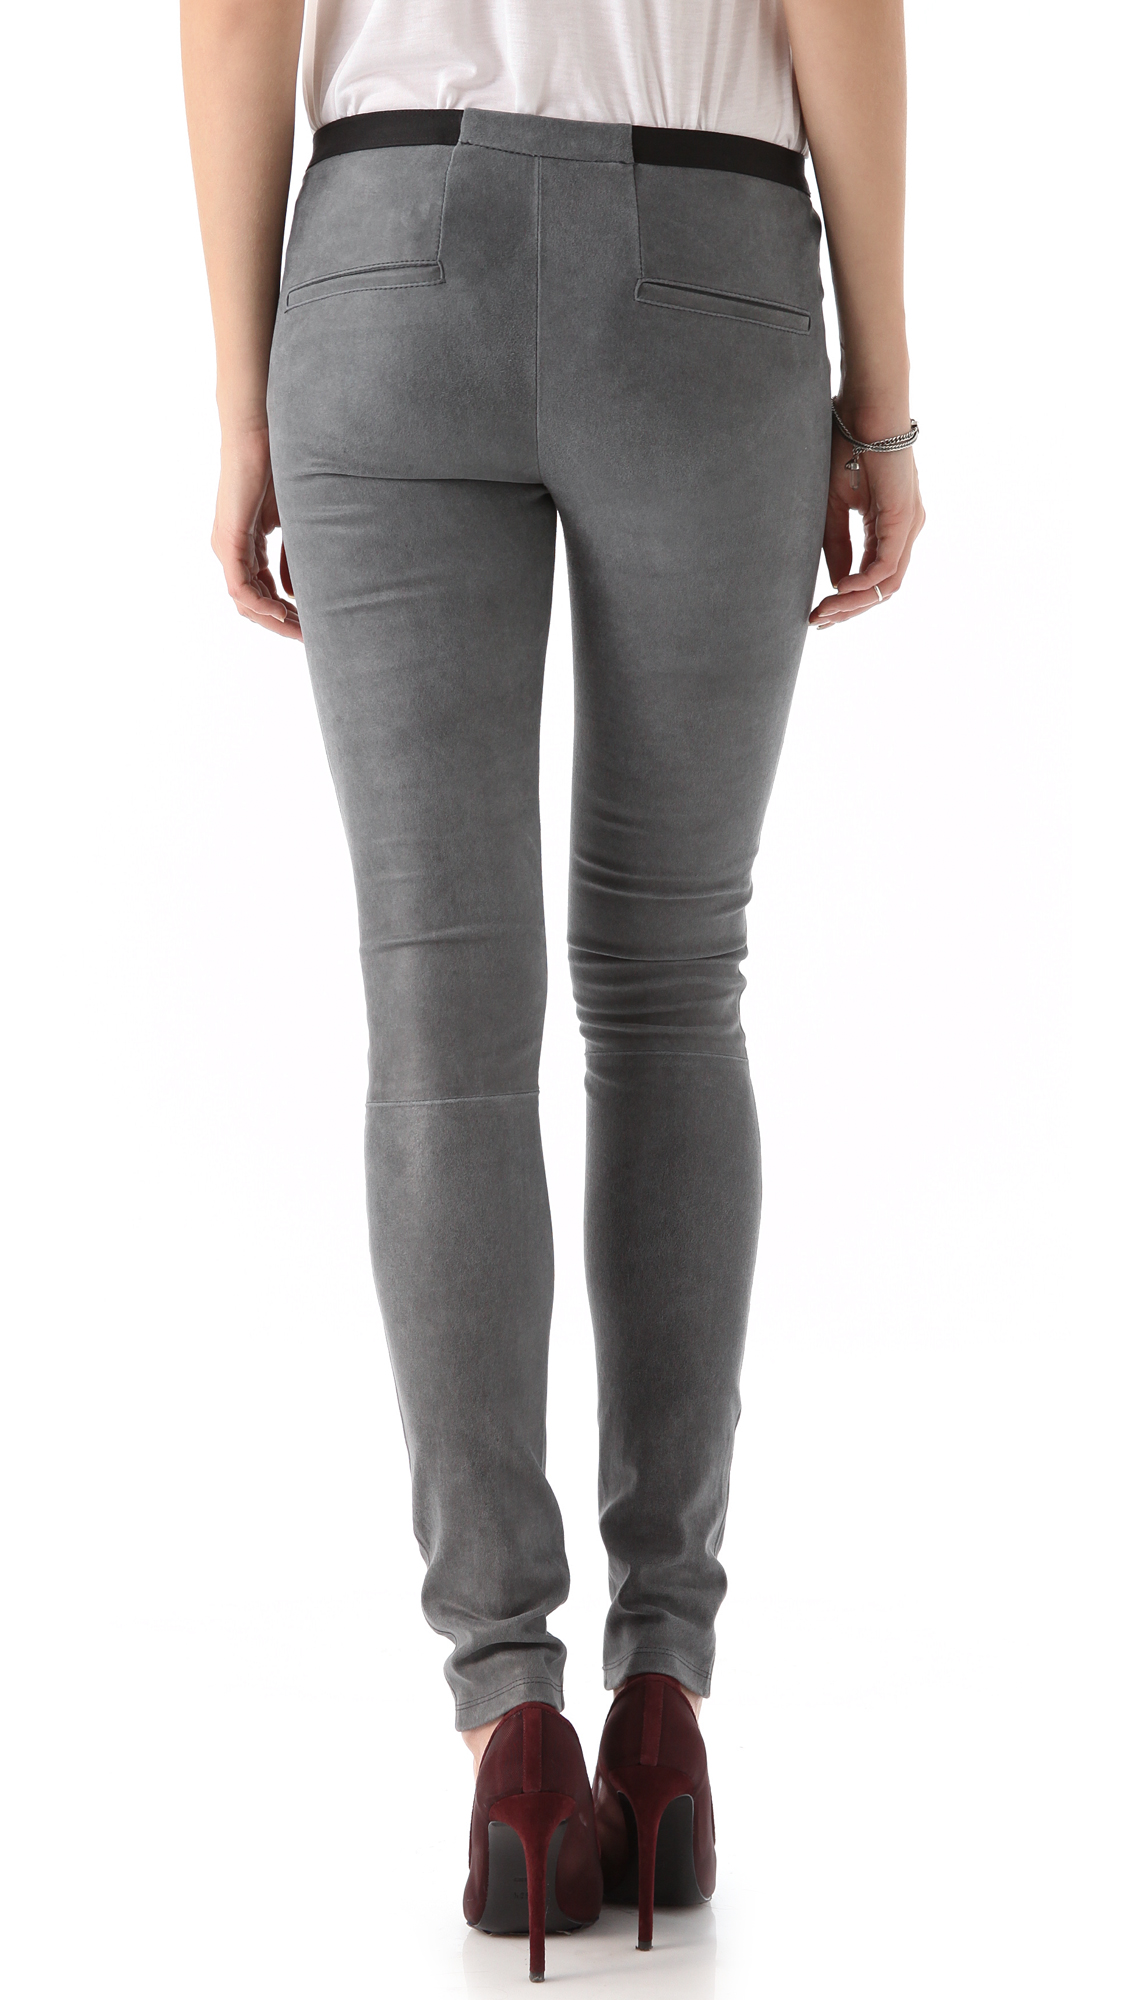 Helmut Lang Leather Leggings Patina Stretch in Gray - Lyst